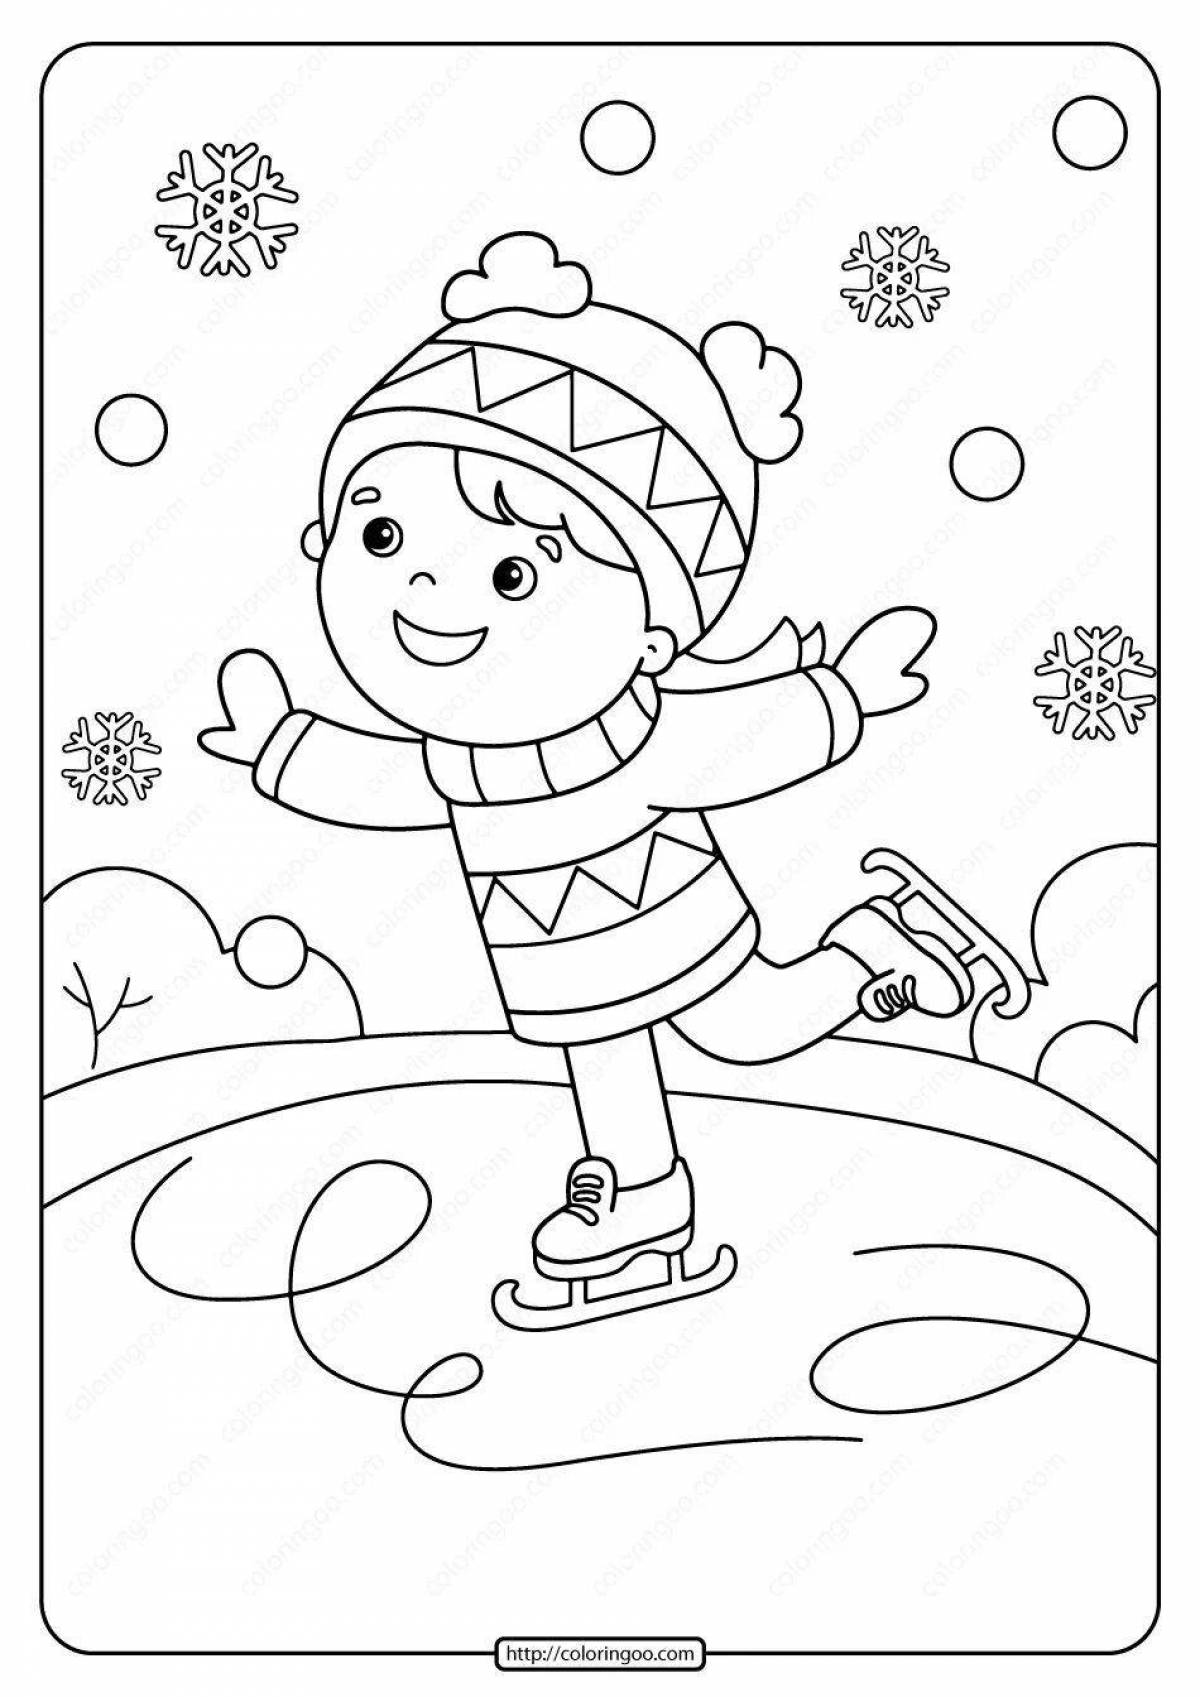 Great winter coloring book for 3-4 year olds